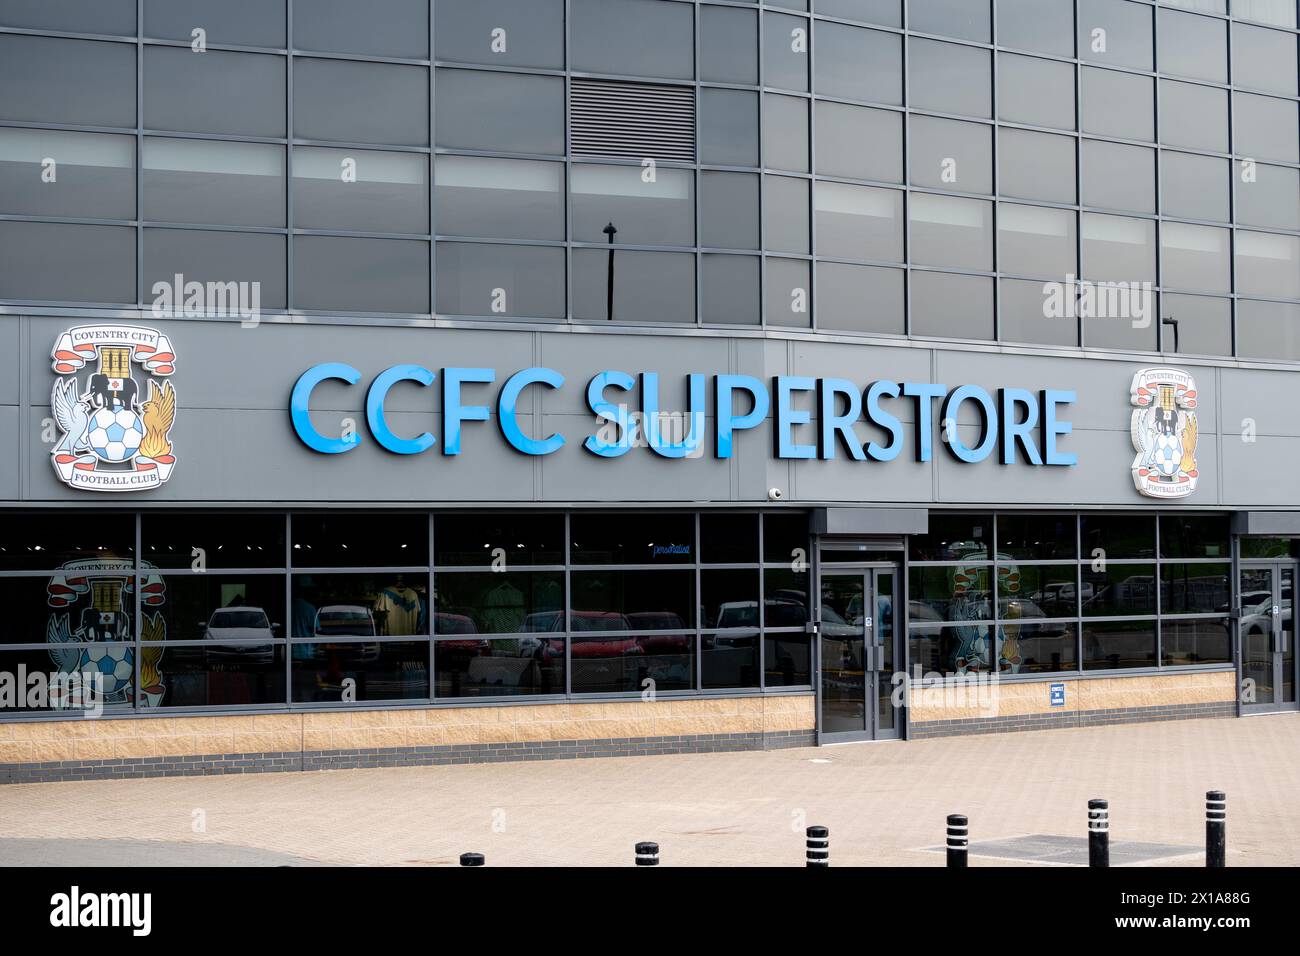 CCFC Superstore, Coventry Building Society Arena, Coventry, Großbritannien Stockfoto